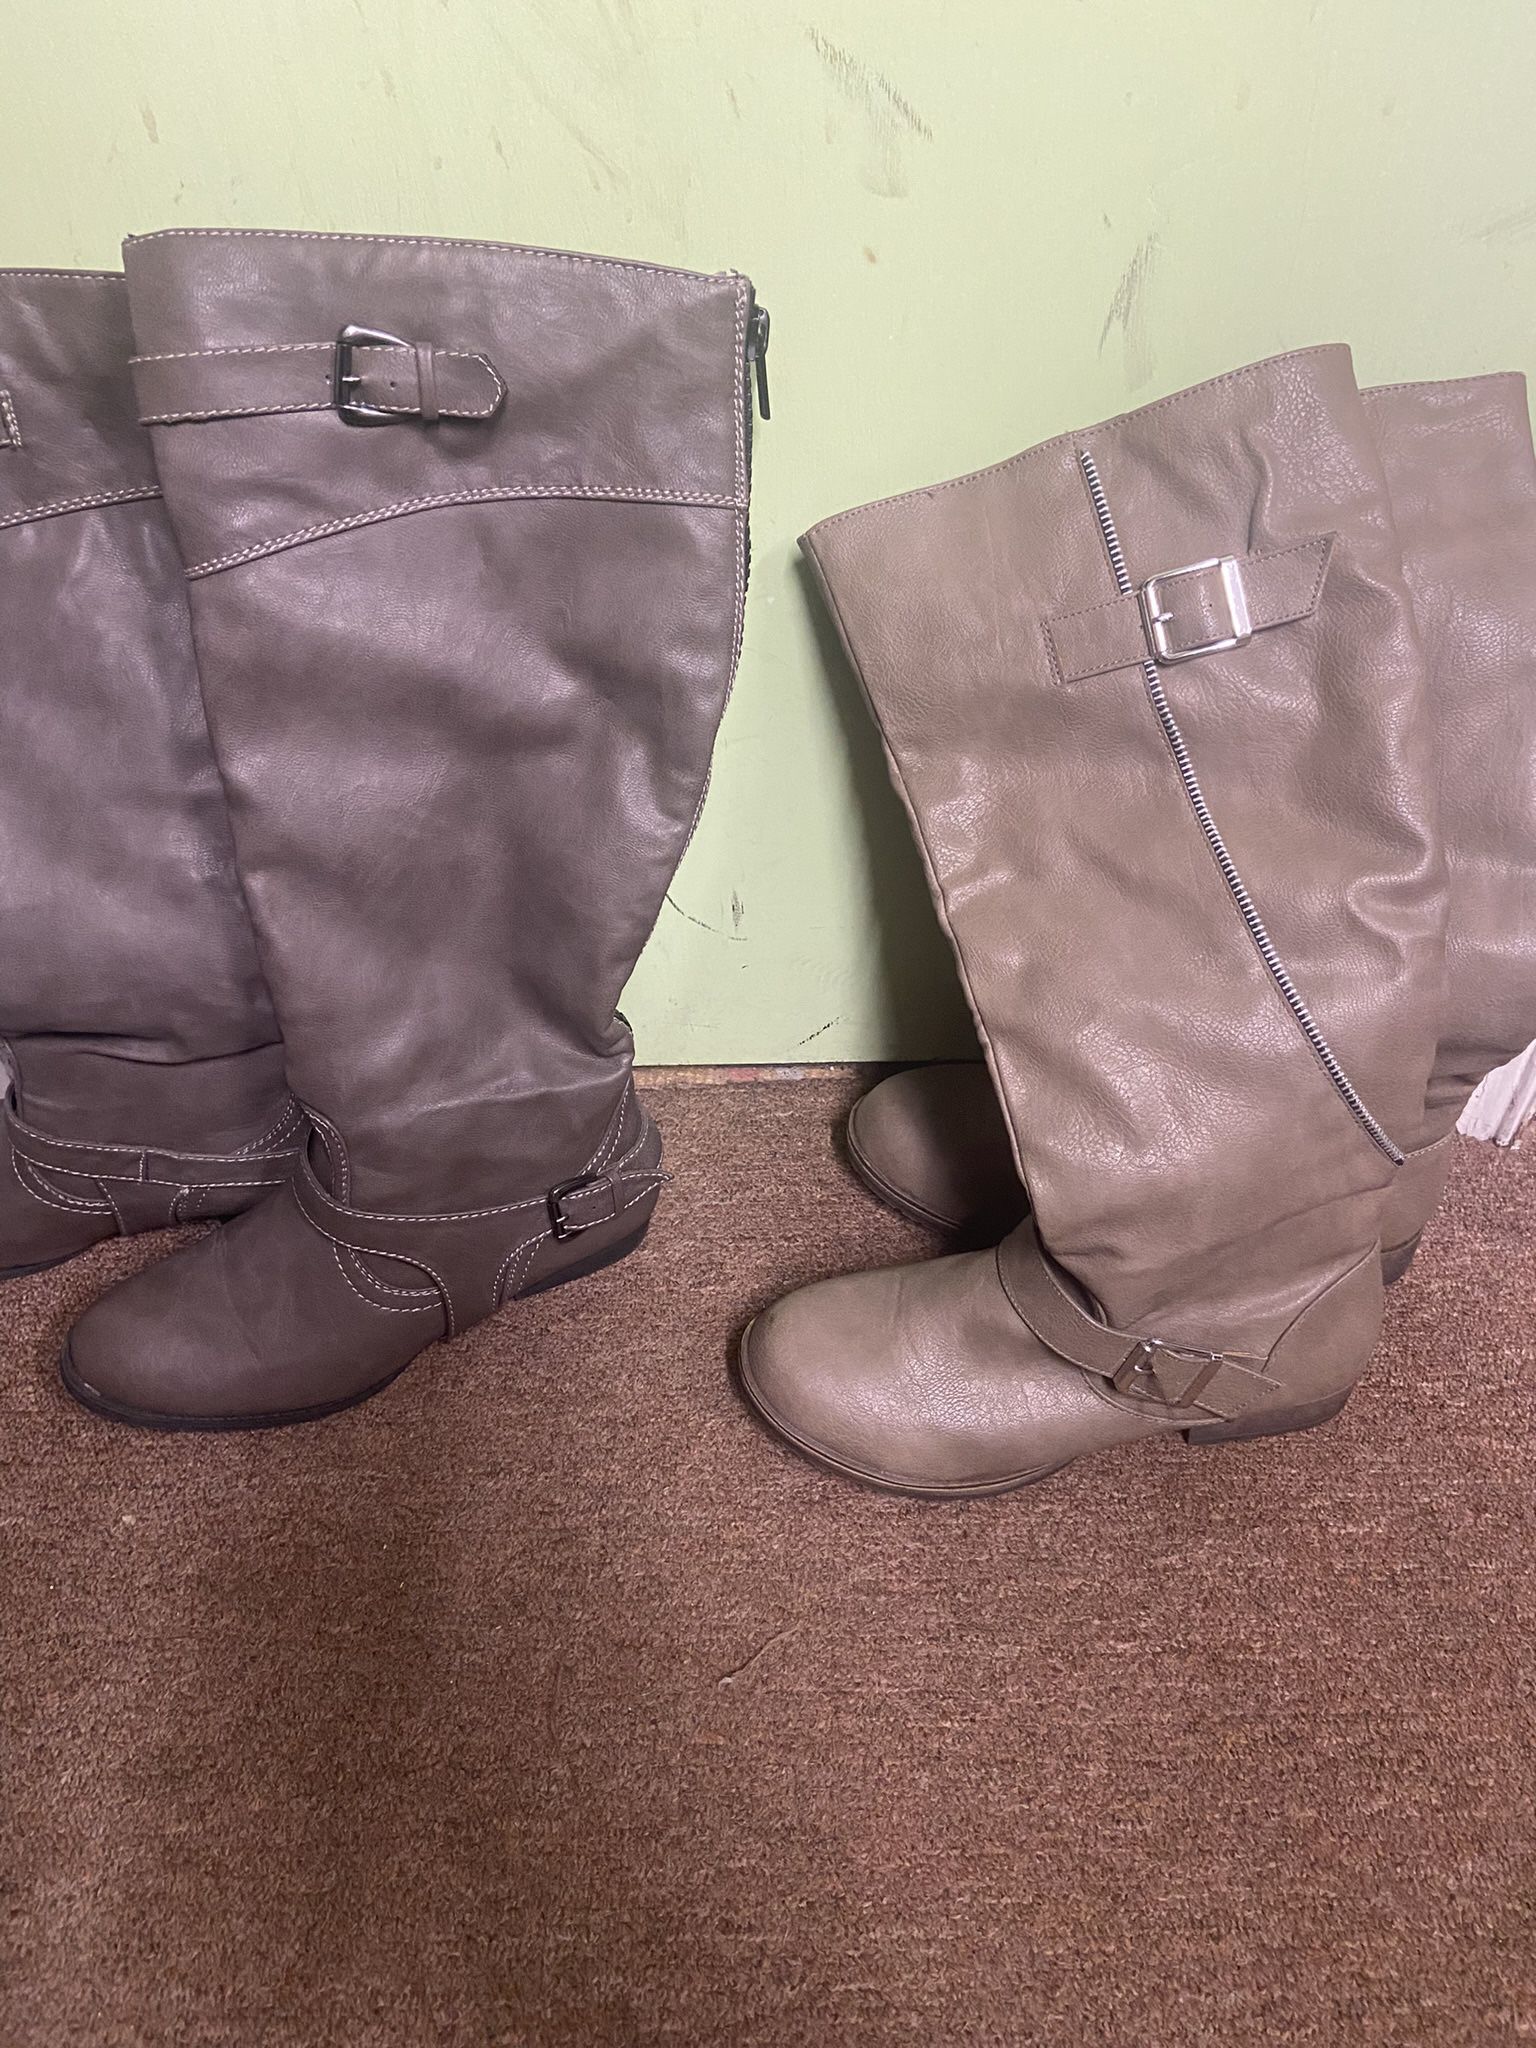 Boots size 9 ladies (2 Pairs)